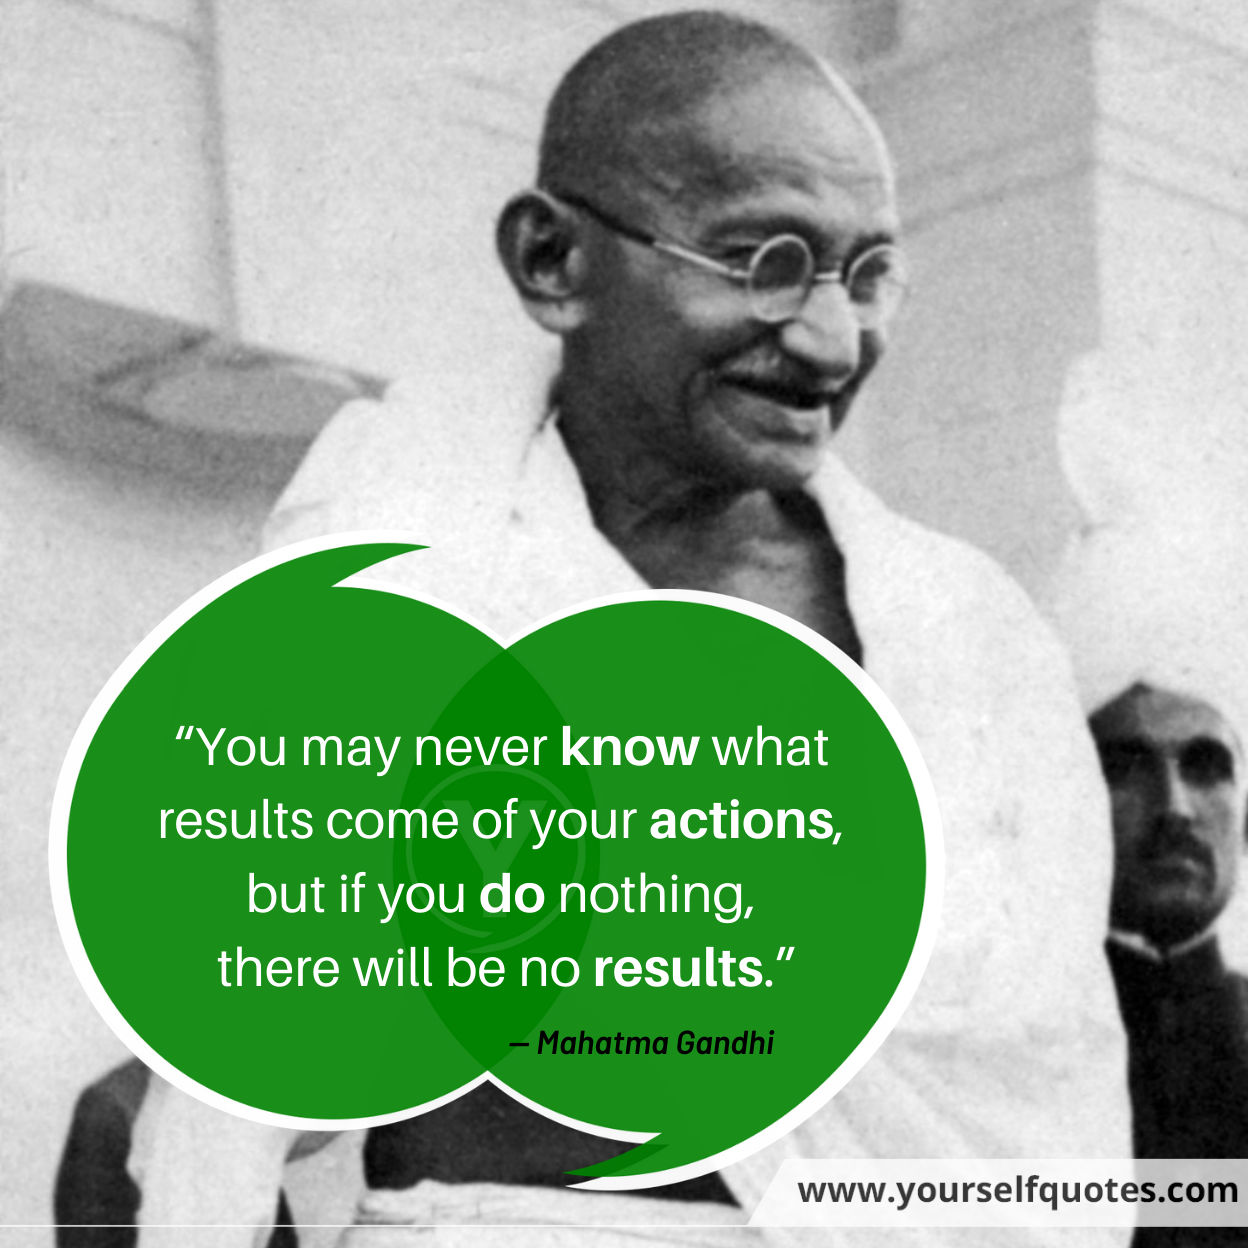 Quote Of The Day by Mahatma Gandhi